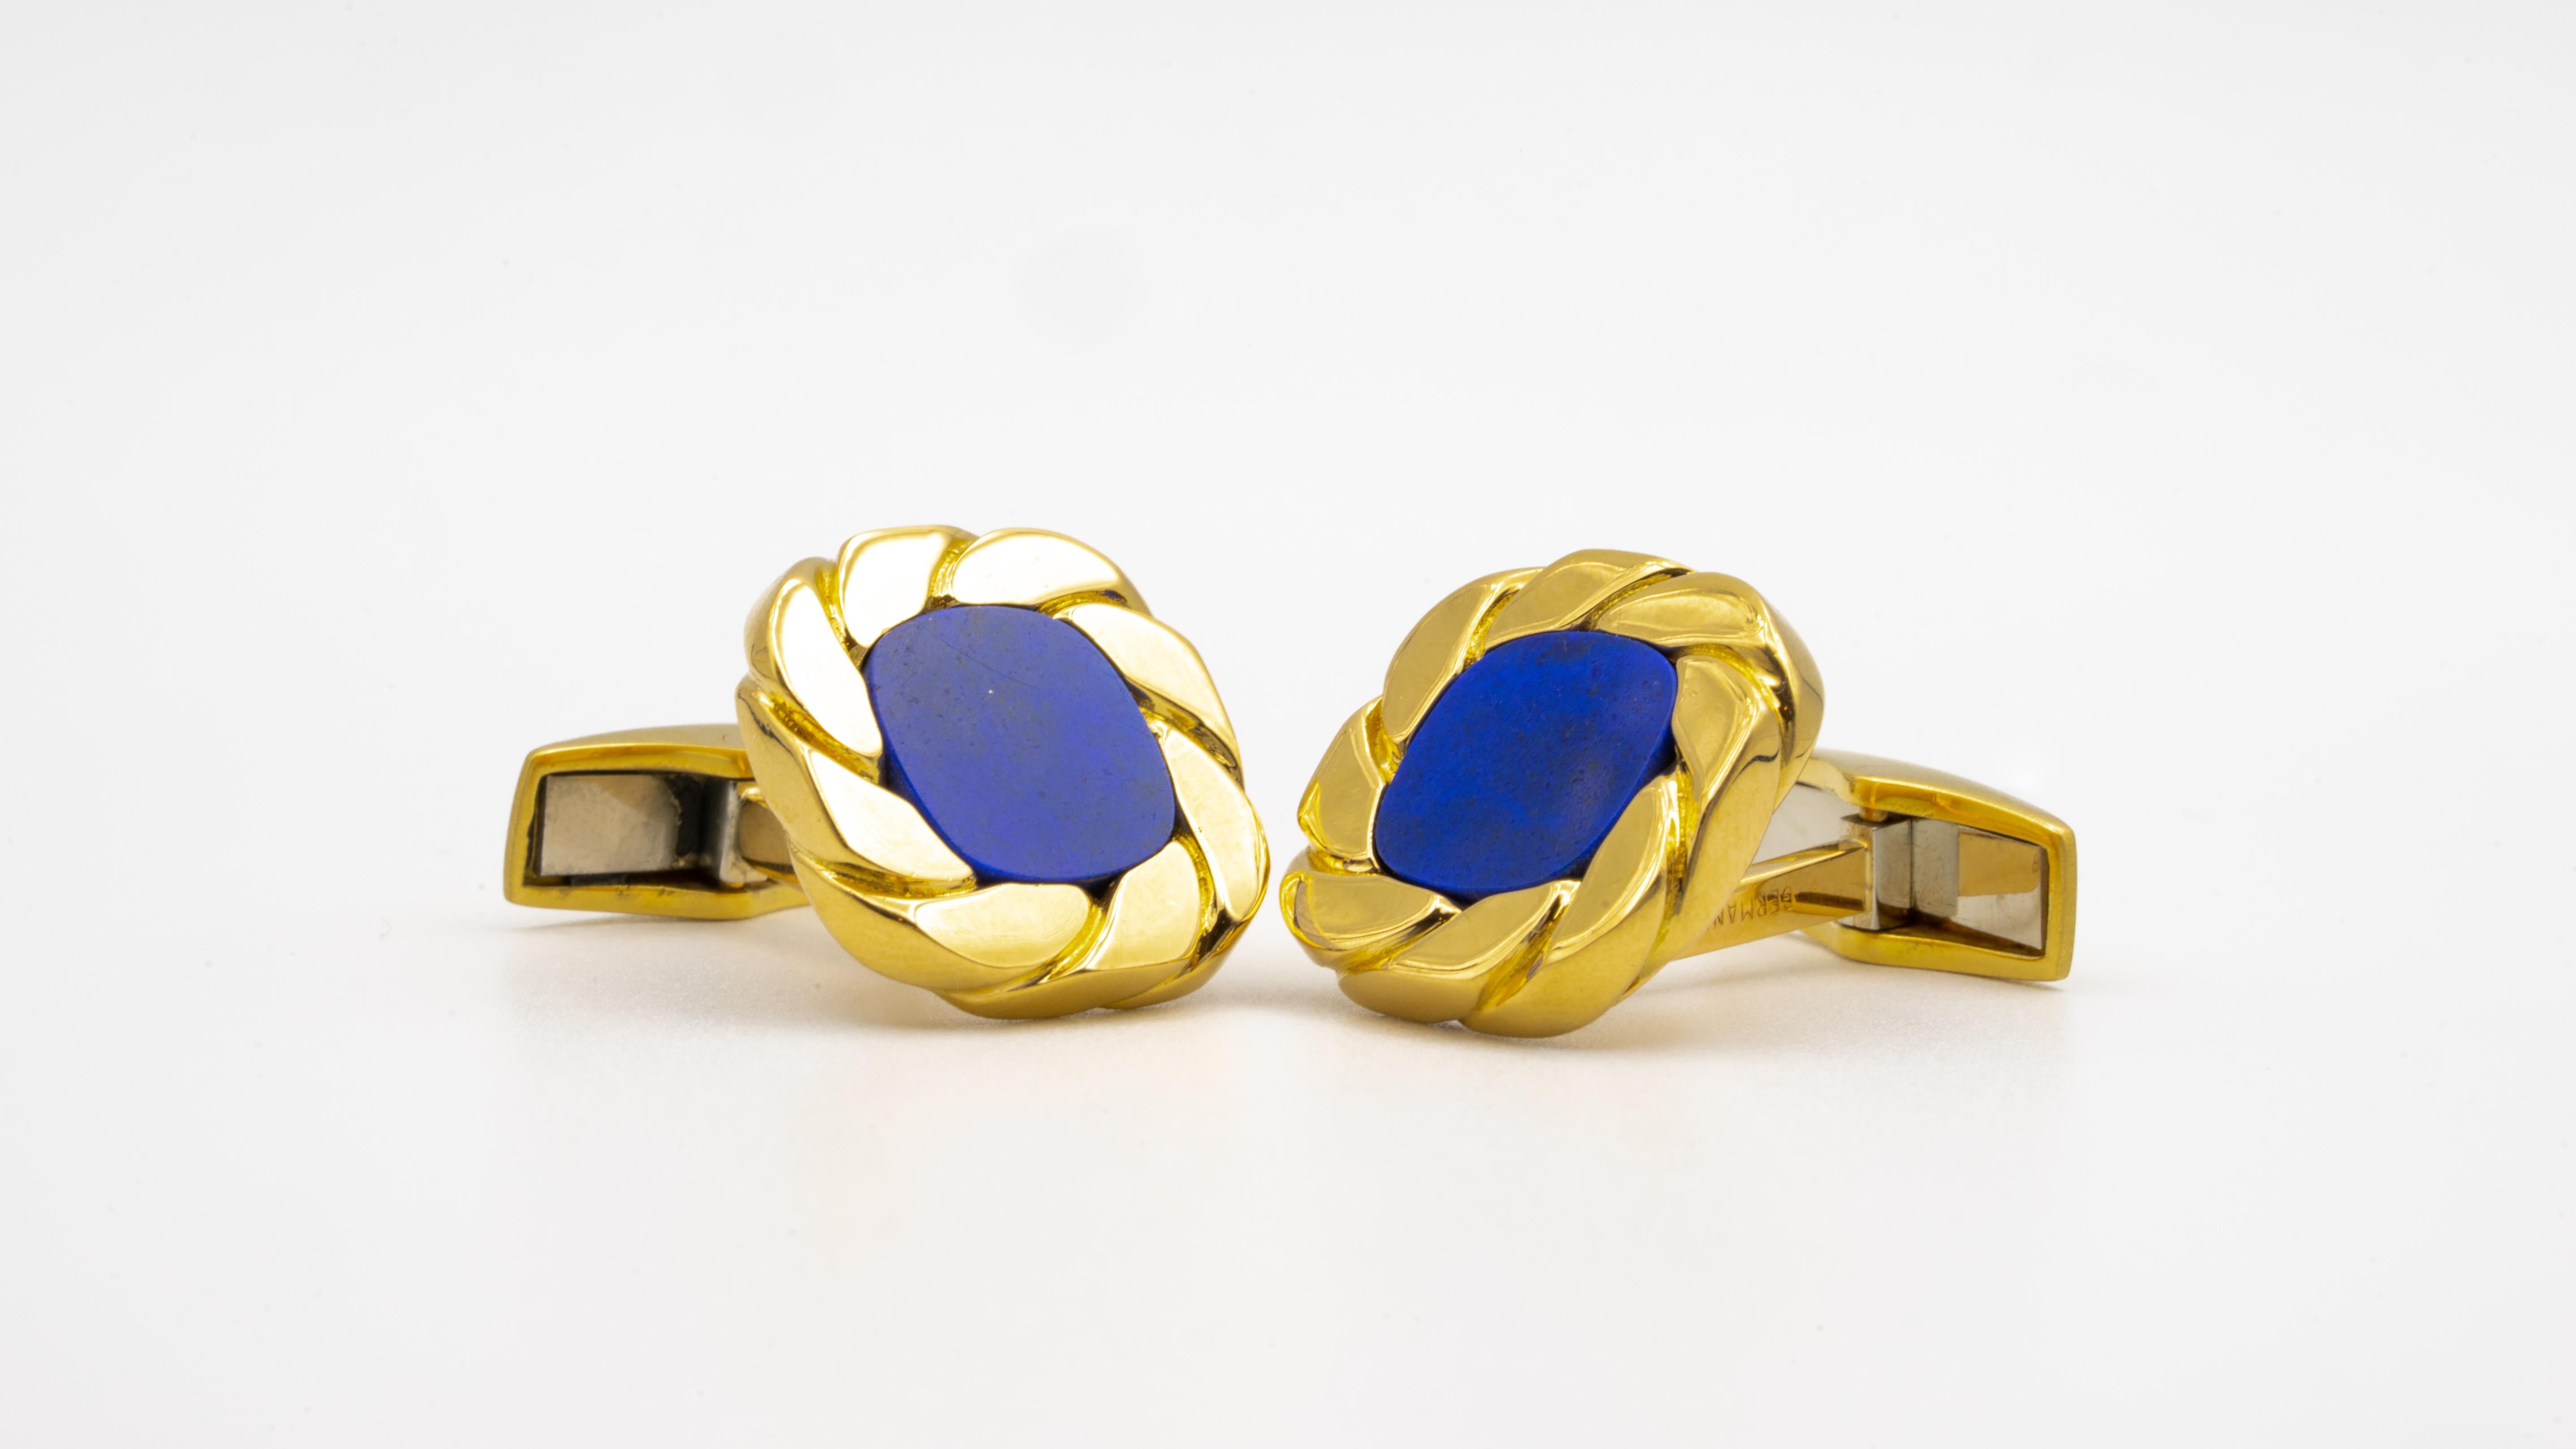 Van Cleef & Arpels pair of 18KT yellow gold cufflinks with 2 cushion-shaped lapis centers within curb link frames. 
Whale Backs
Stamp: Signed VCA, Germany, no. 12V666.1, 
Weight: 25.7 grams
Diameters: 3/4 inch